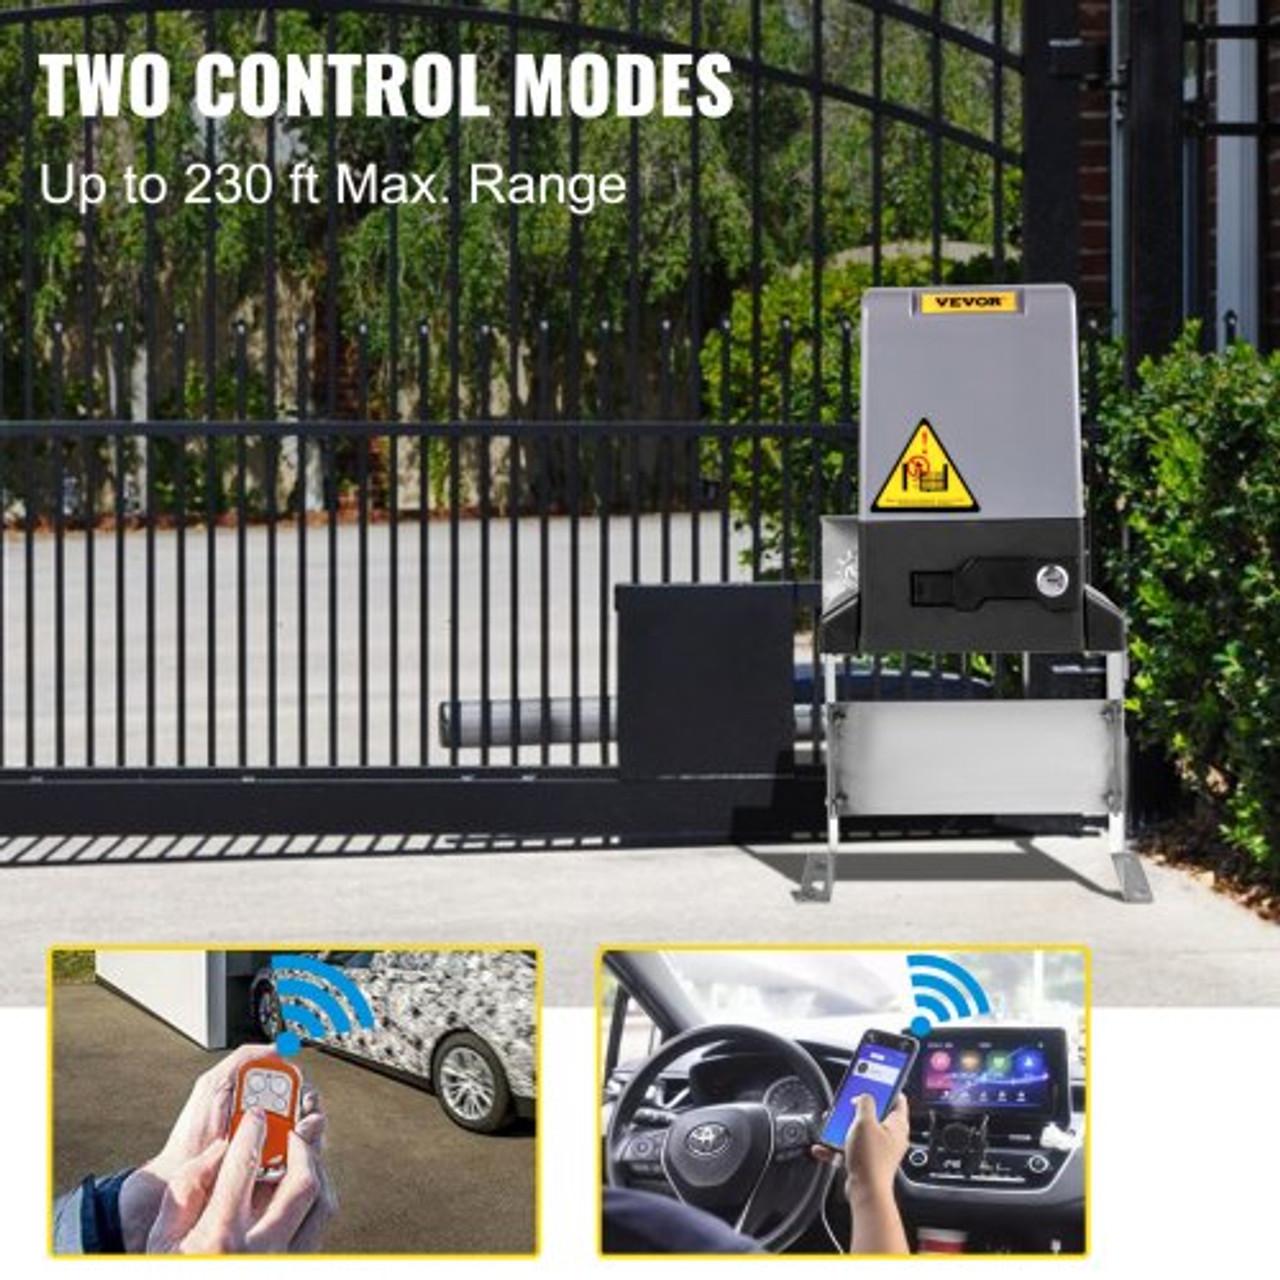 Sliding Gate Opener 3300 LBS Automatic Sliding Gate, Gate Opener Motor with 2 Remote Controls, 230 ft Remote Distance Driveway Rolling Gate, Automatic Sliding Gate Opener for Sliding Gate